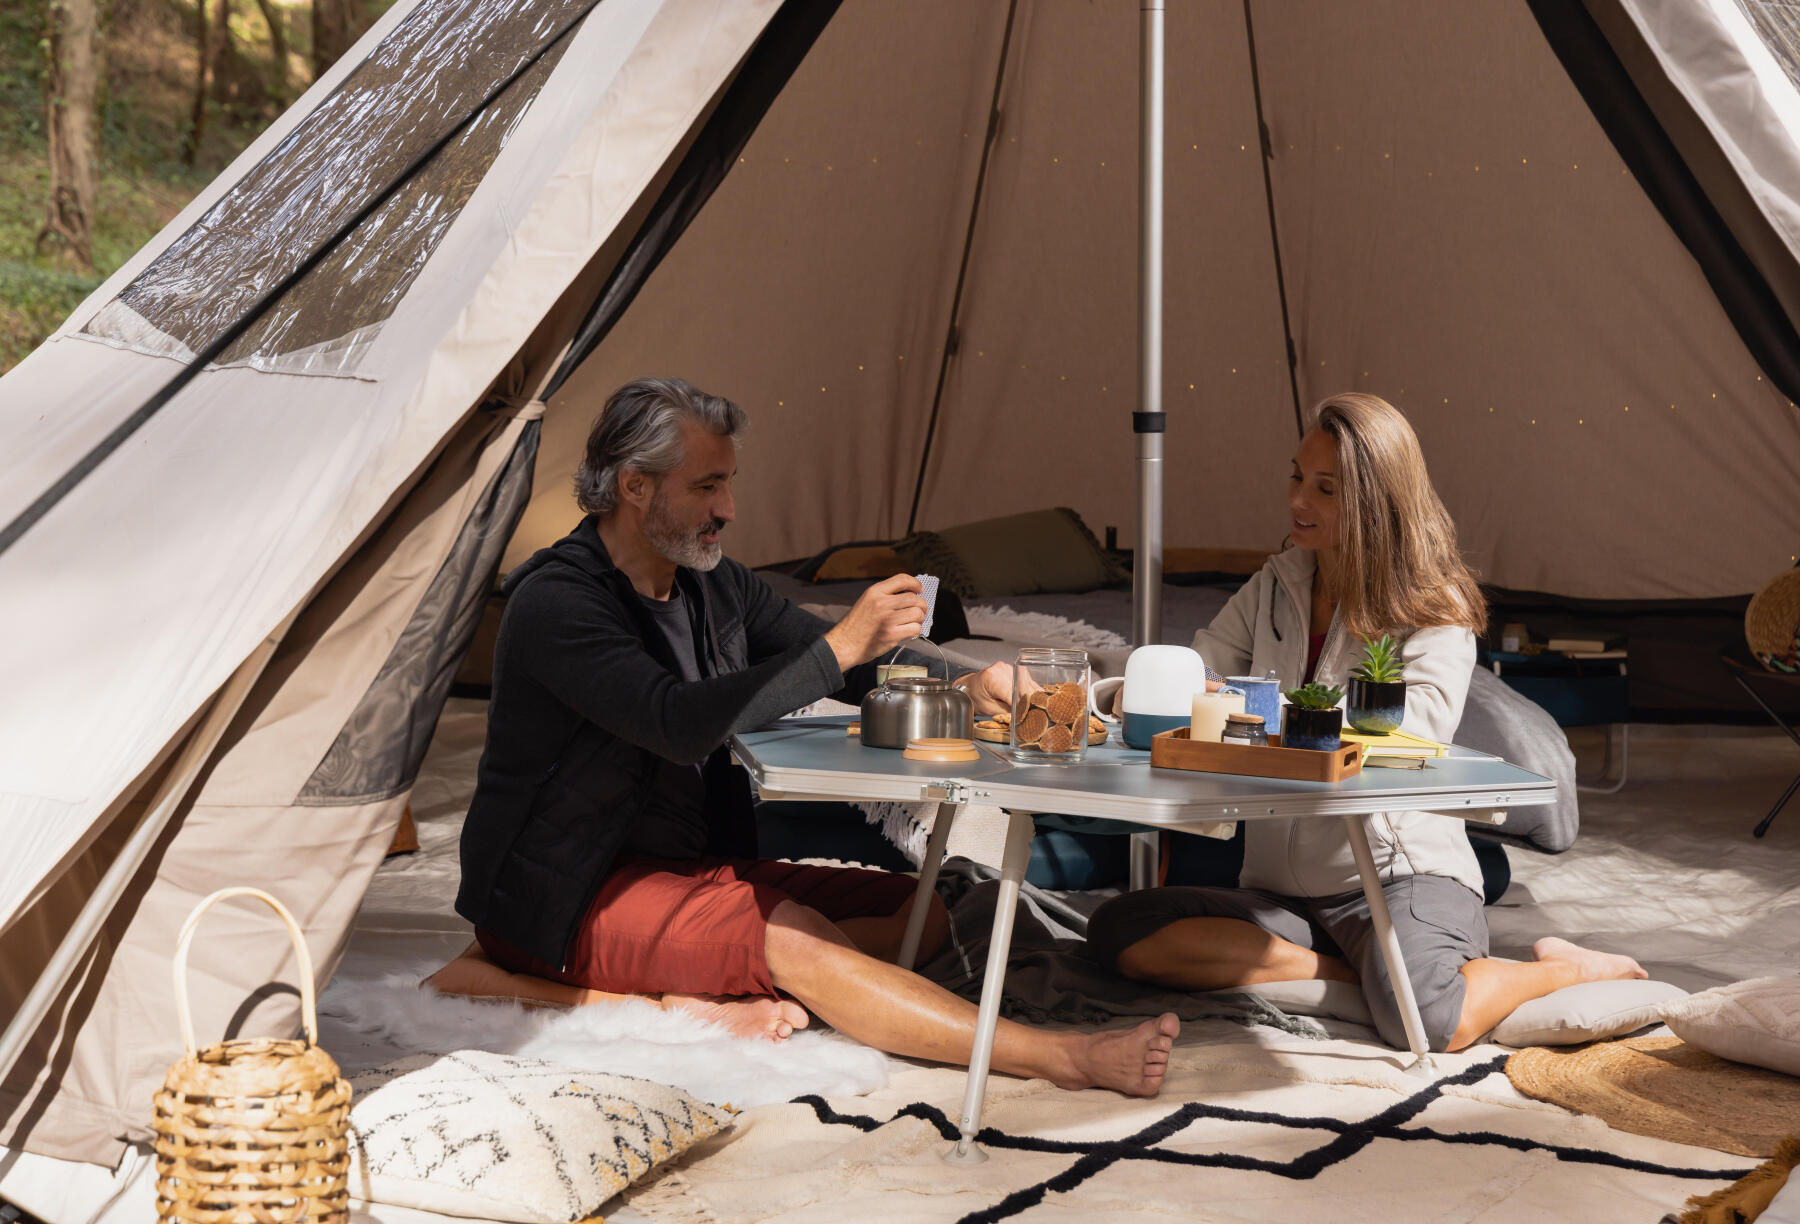 Glamping is possible in many countries